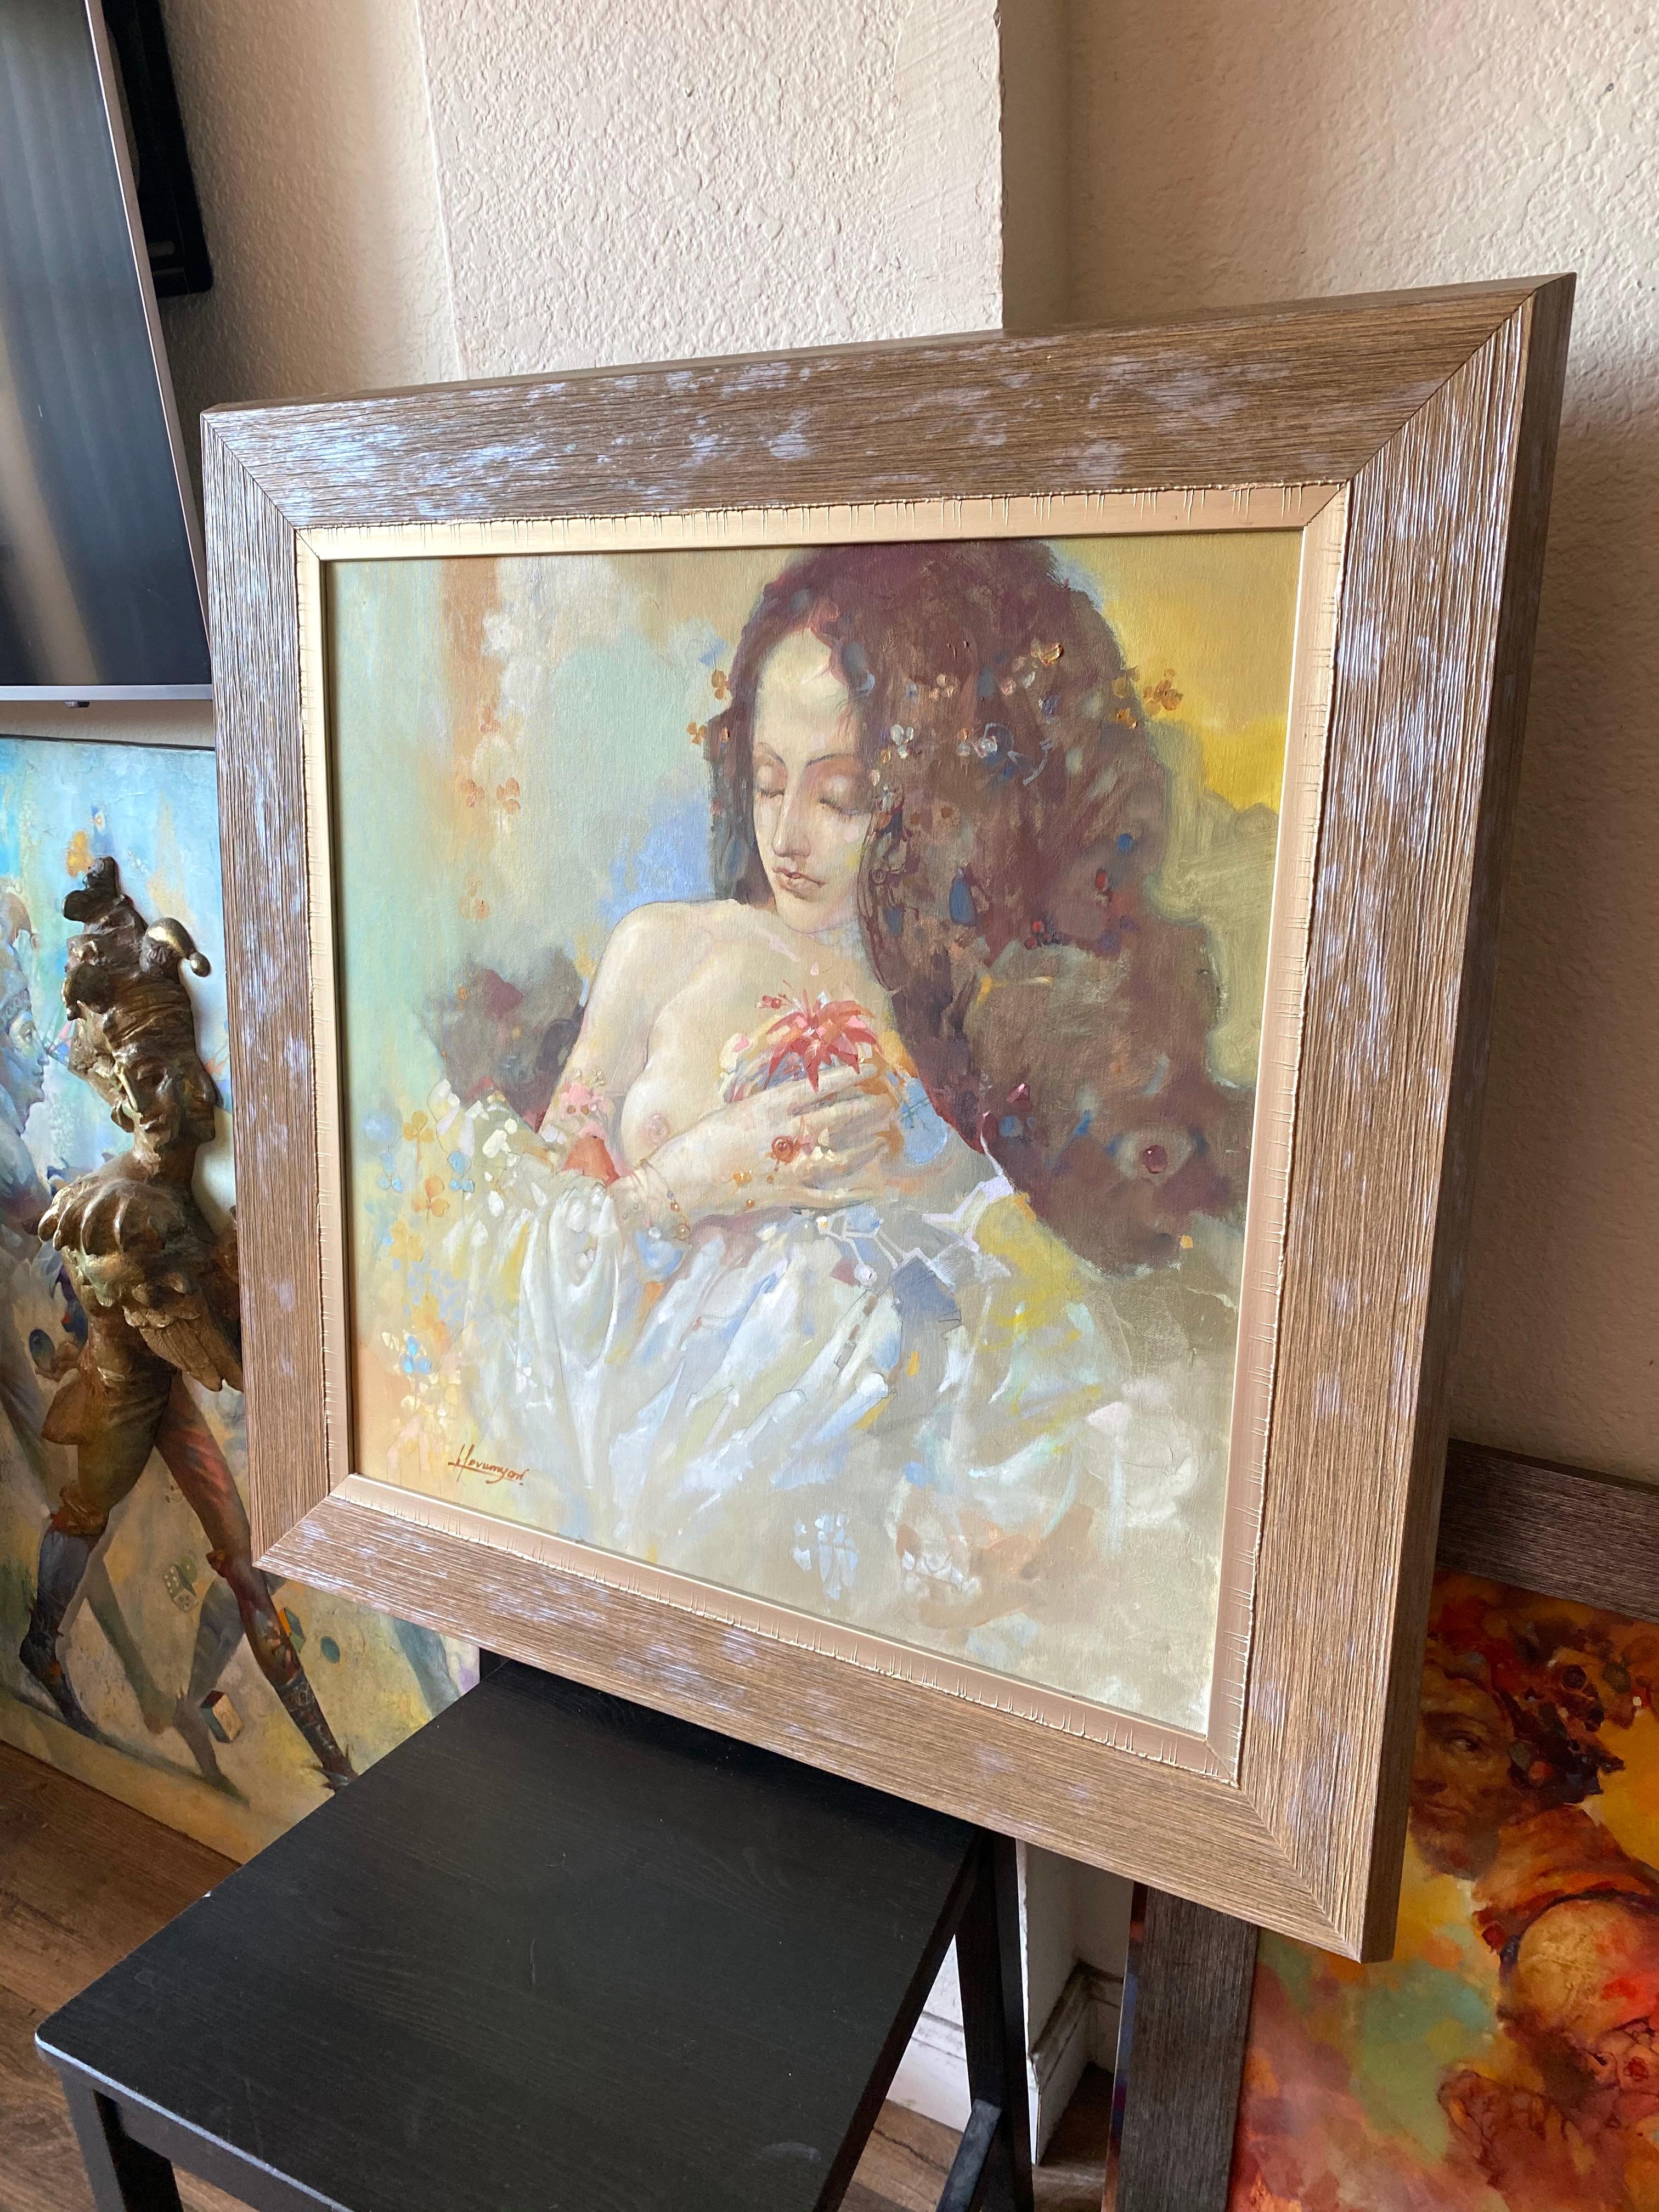 Inspiration, Original oil Painting, Ready to Hang - Gray Figurative Painting by Tigran Hovumyan